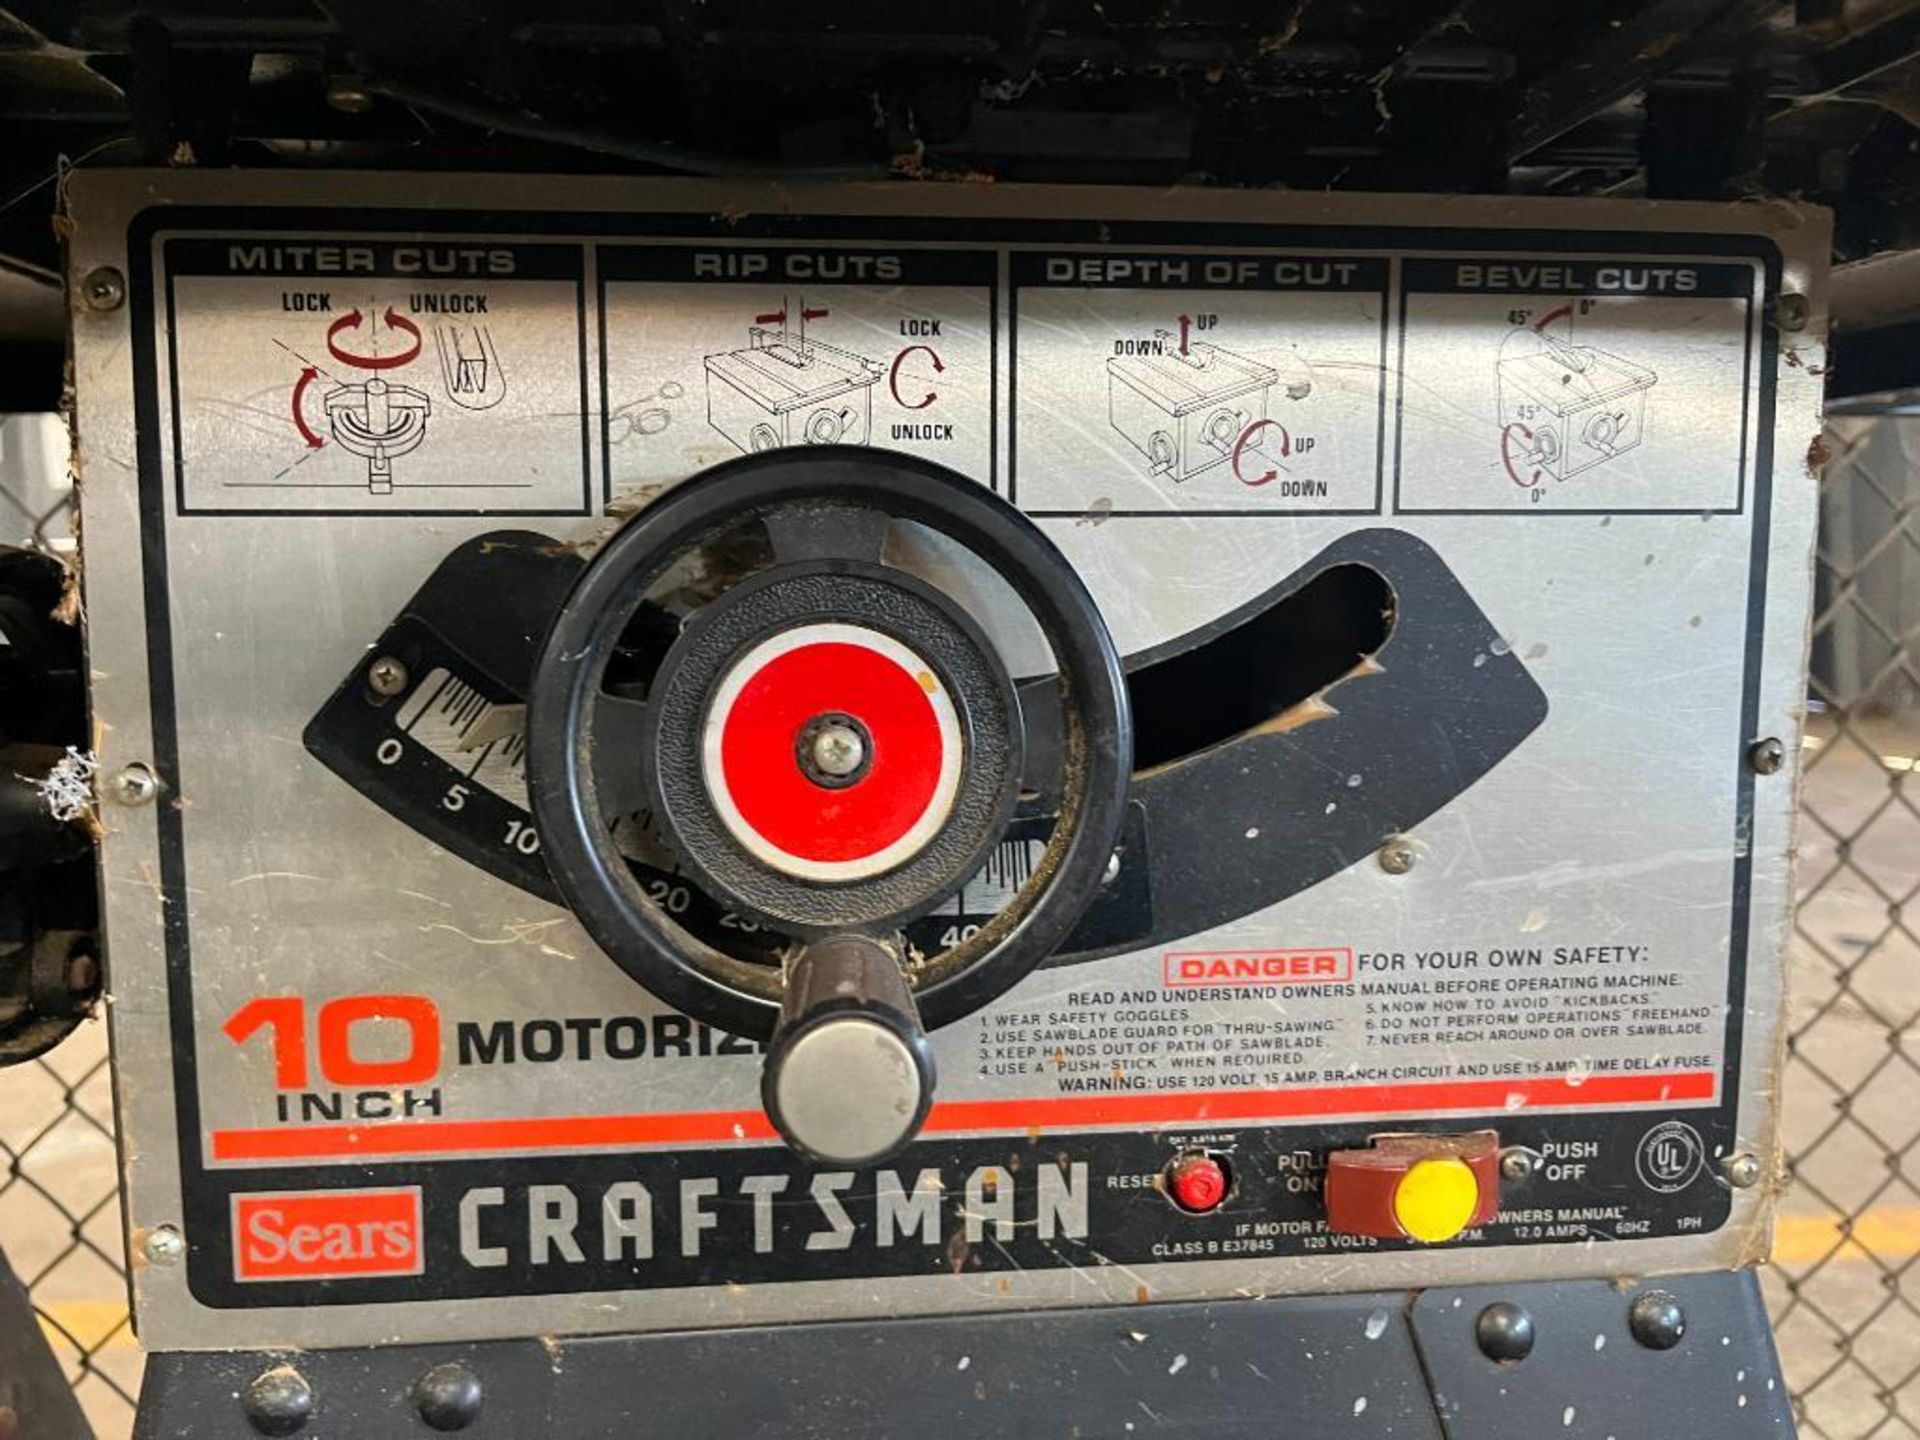 Craftsman 10 inch Motorized Table Saw, model 113.298051, S/N 4129.M0247 - Image 5 of 6